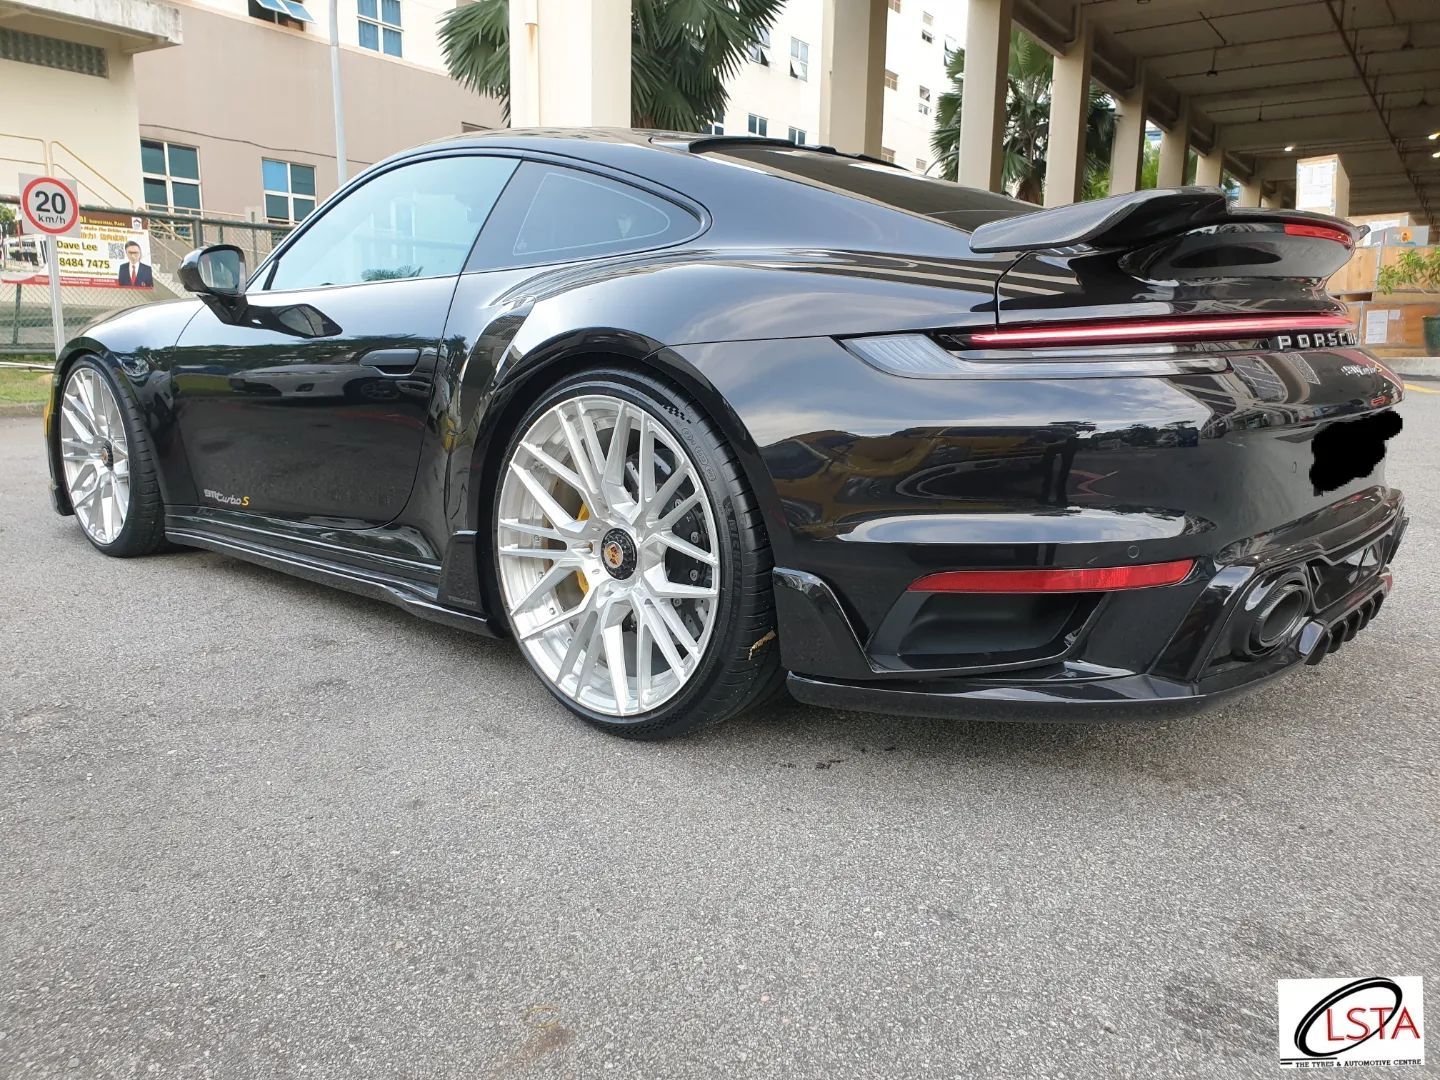 Porsche 911 Turbo 992 with 21 and 22-inch AL13 D008 5050